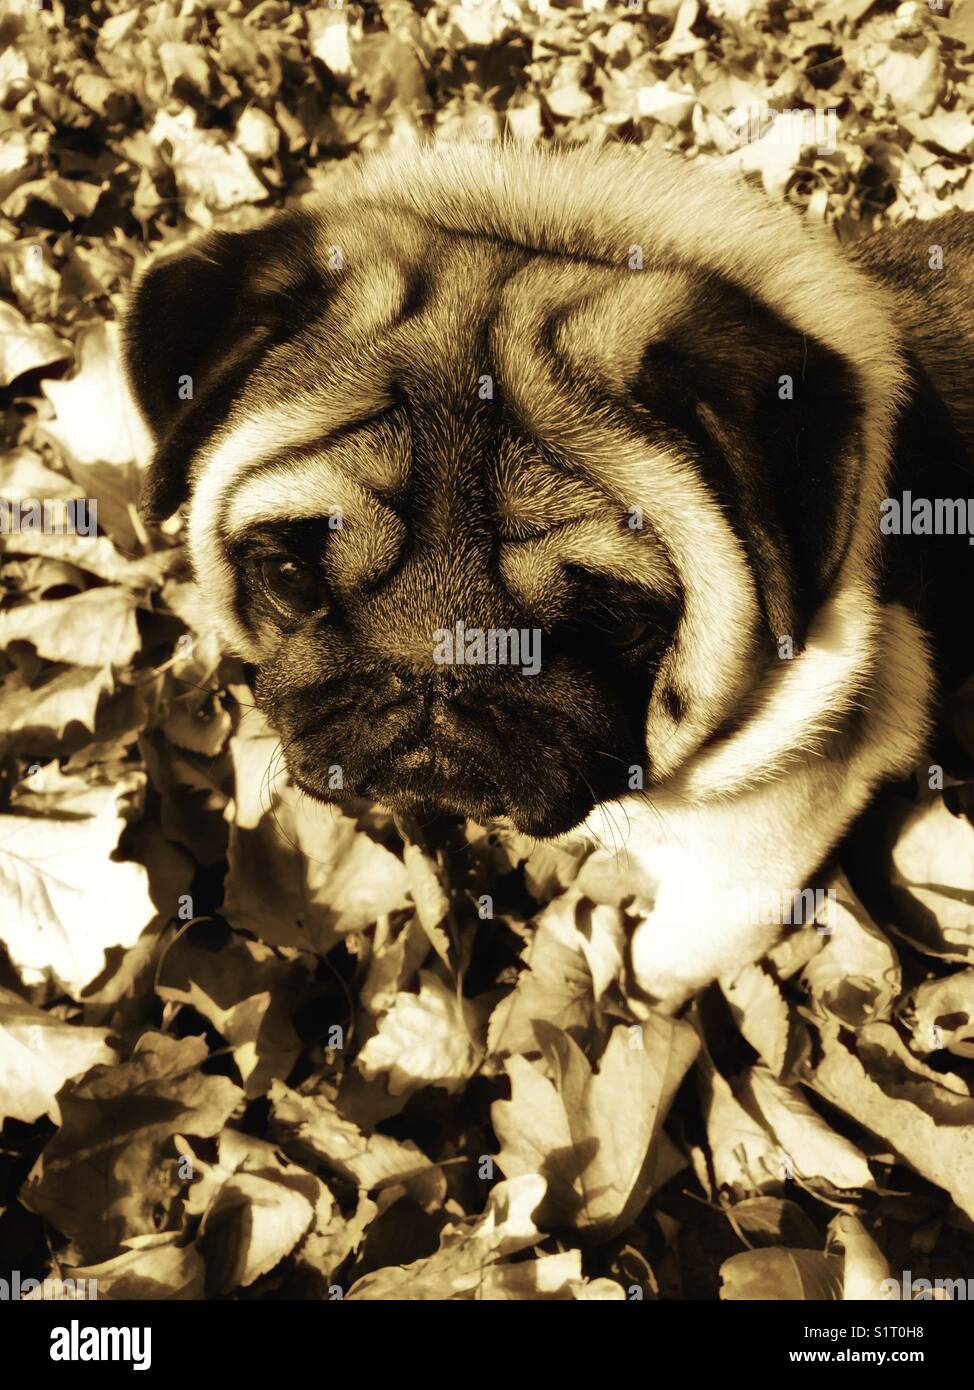 Wrinkles and leaves, a black muzzled, wrinkled pug playing in leaves Stock Photo